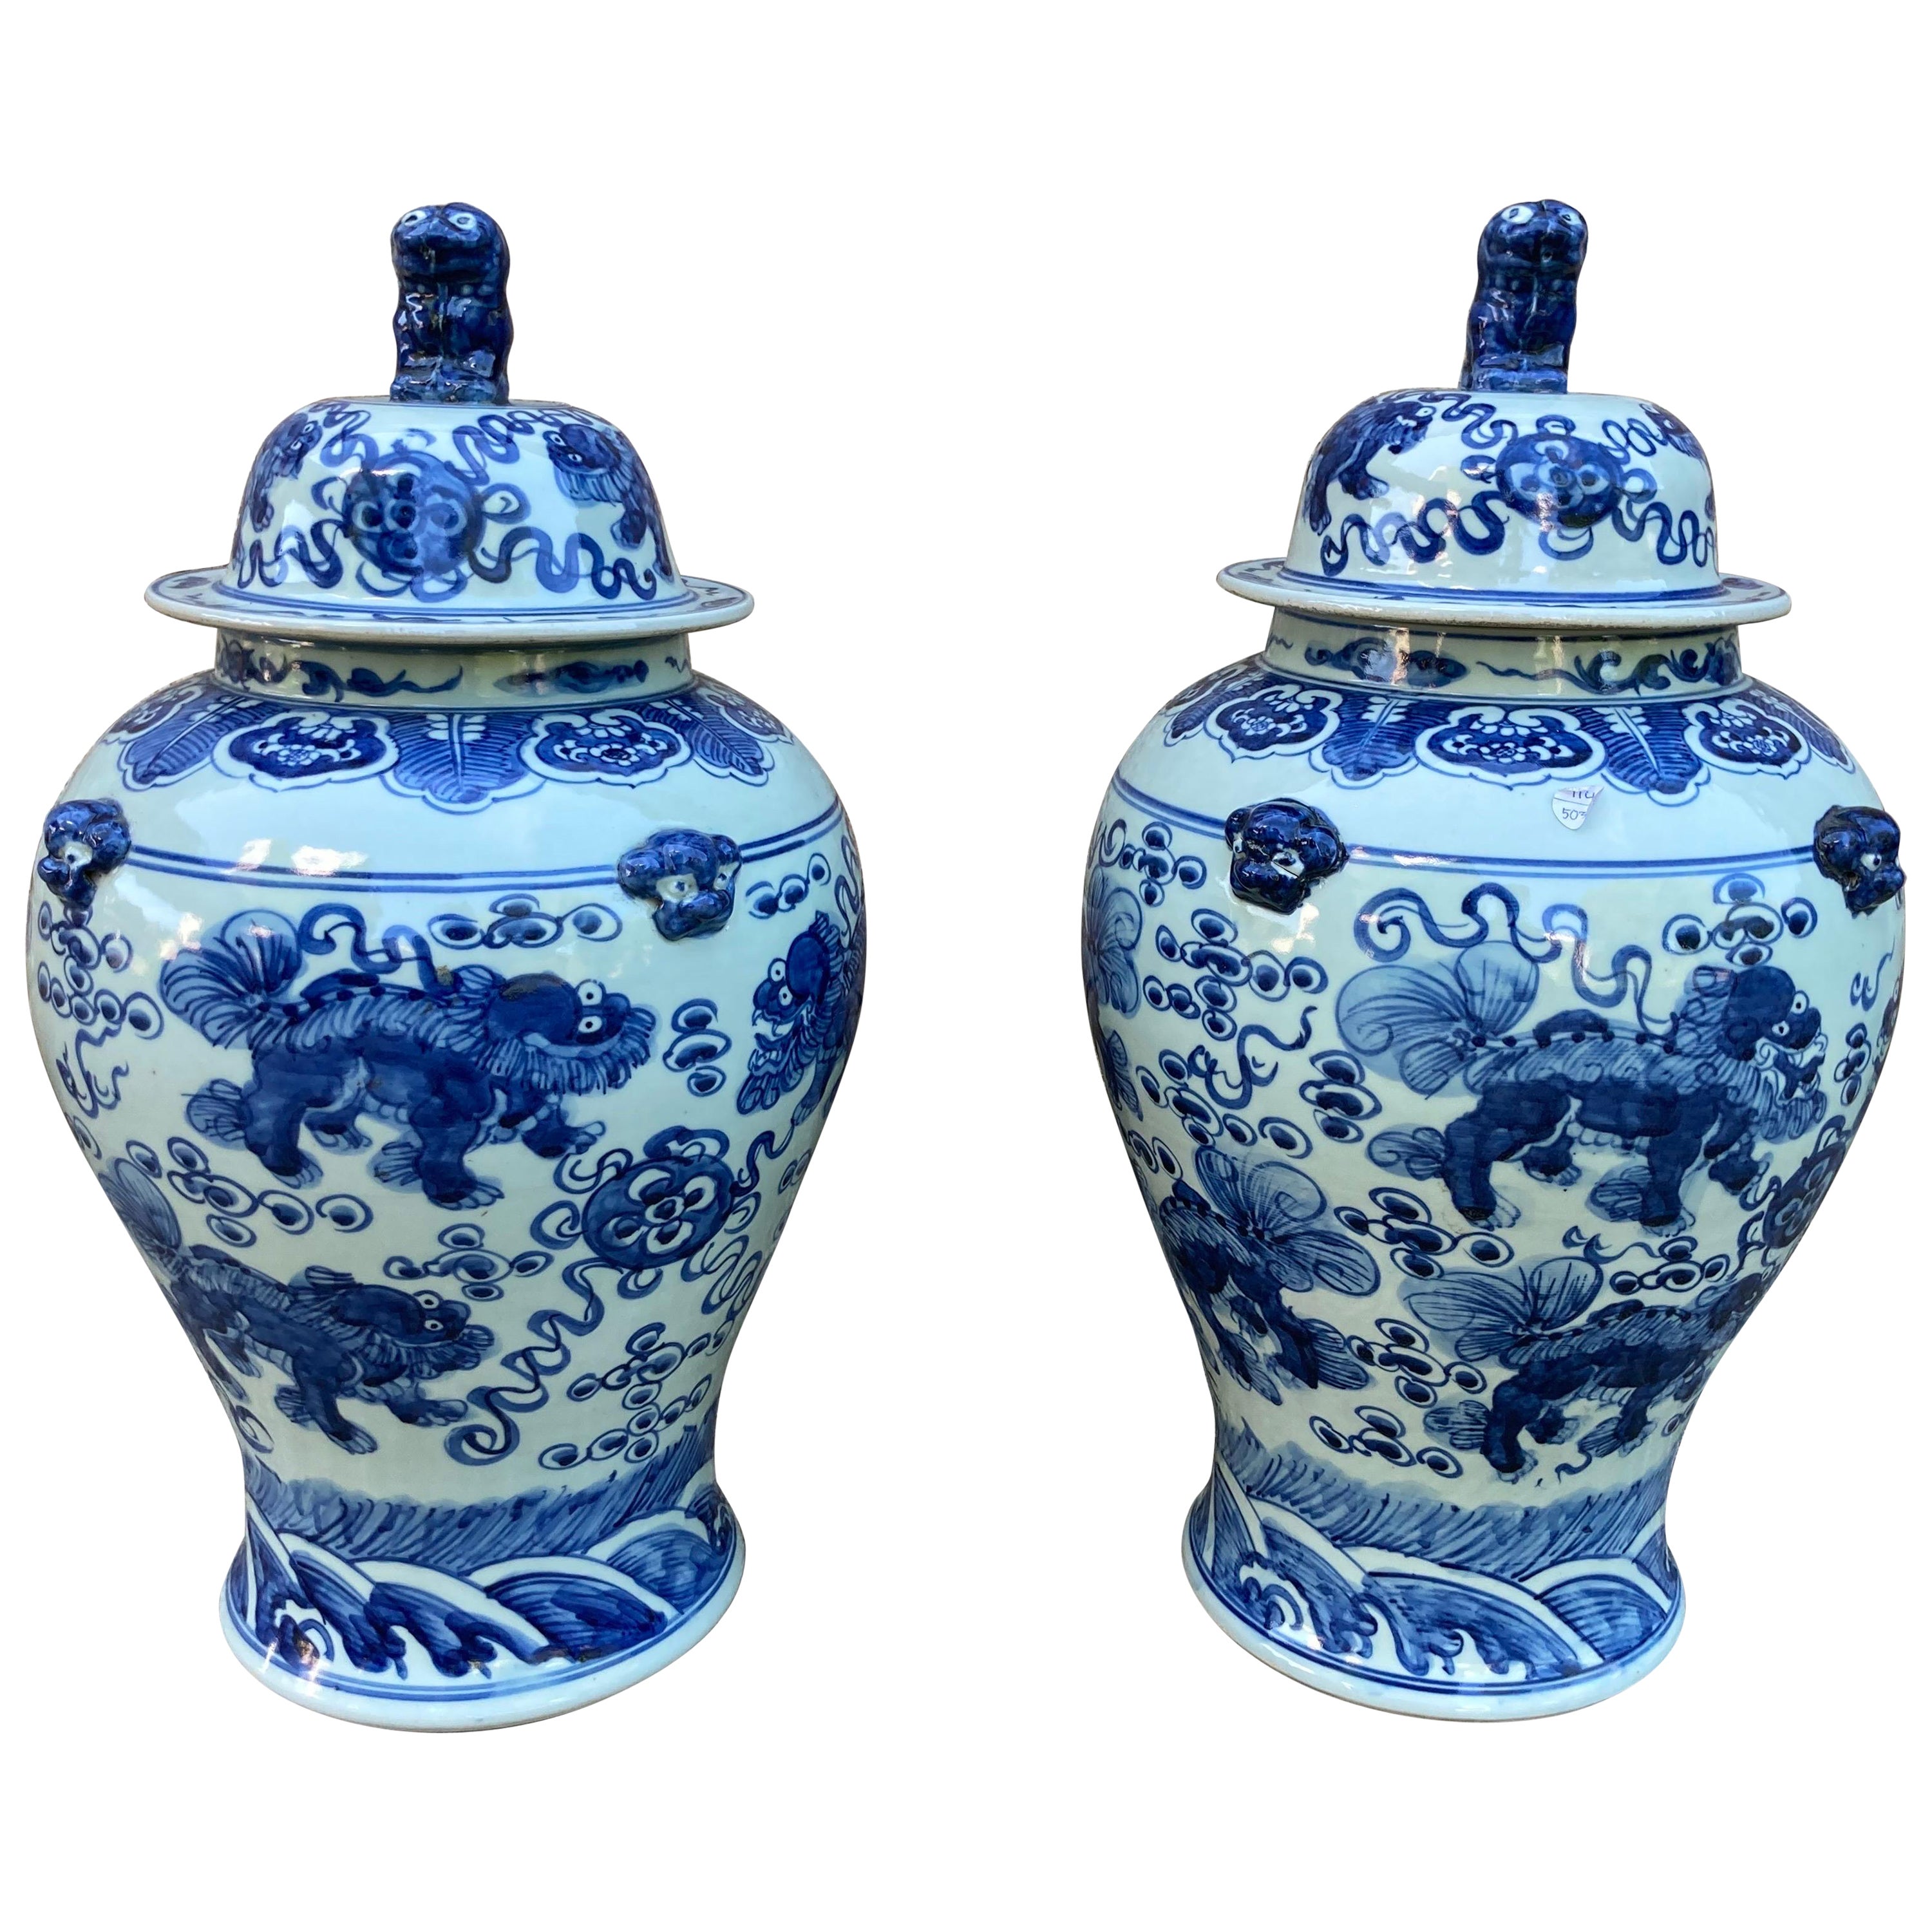 Large Pair of Chinese Blue and White Jars with Lids